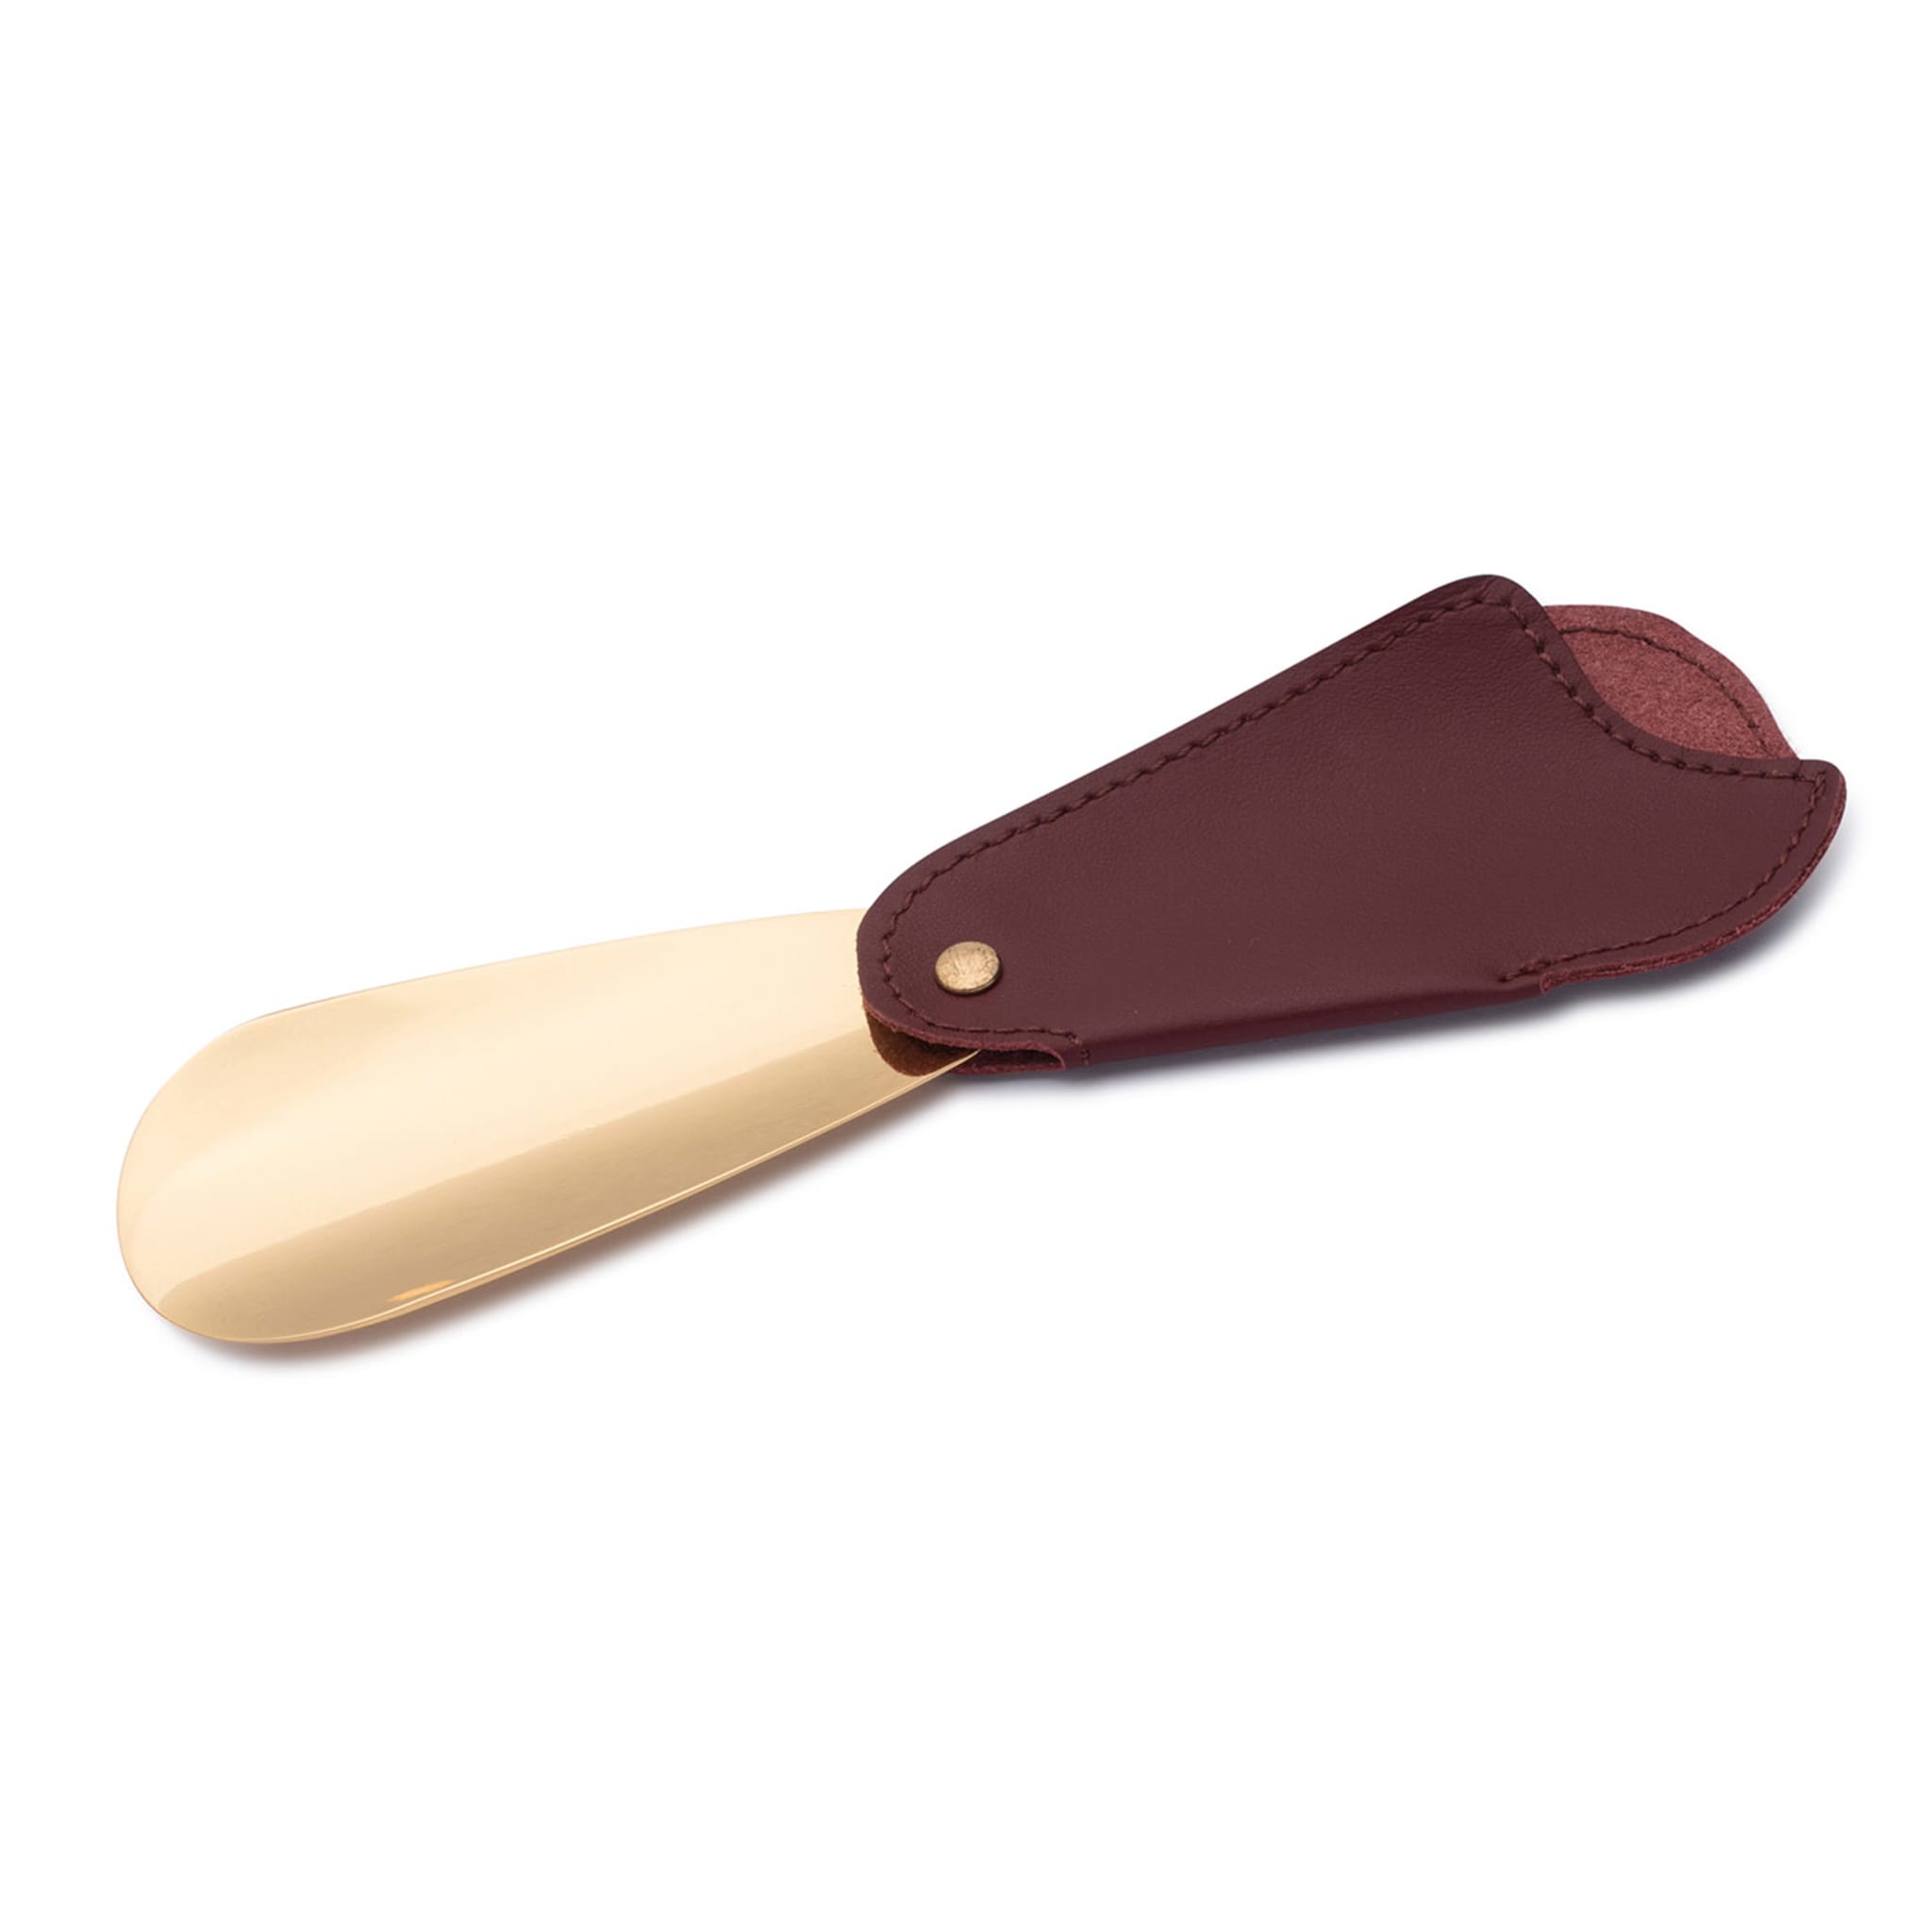 Burgundy & Gold Leather Travel Shoe Horn - Alternative view 1